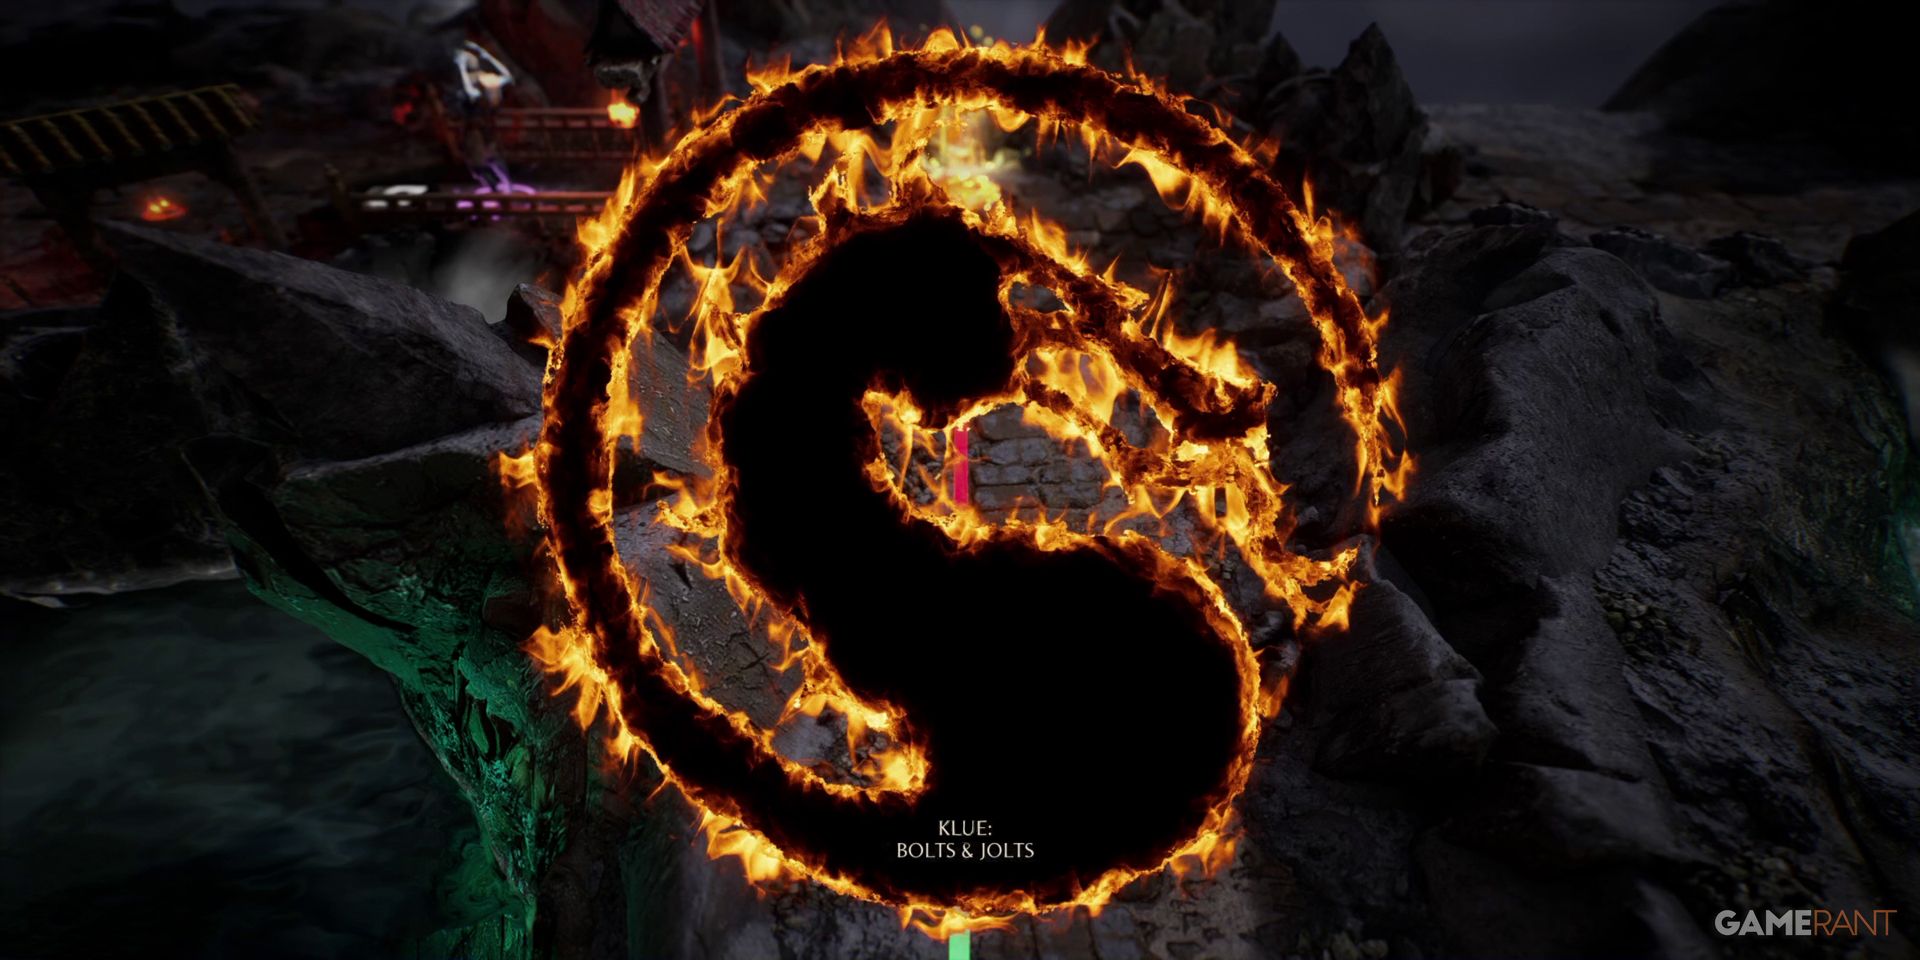 The BOLTS & JOLTS Klue in Season 3 of Mortal Kombat 1's Invasions Mode